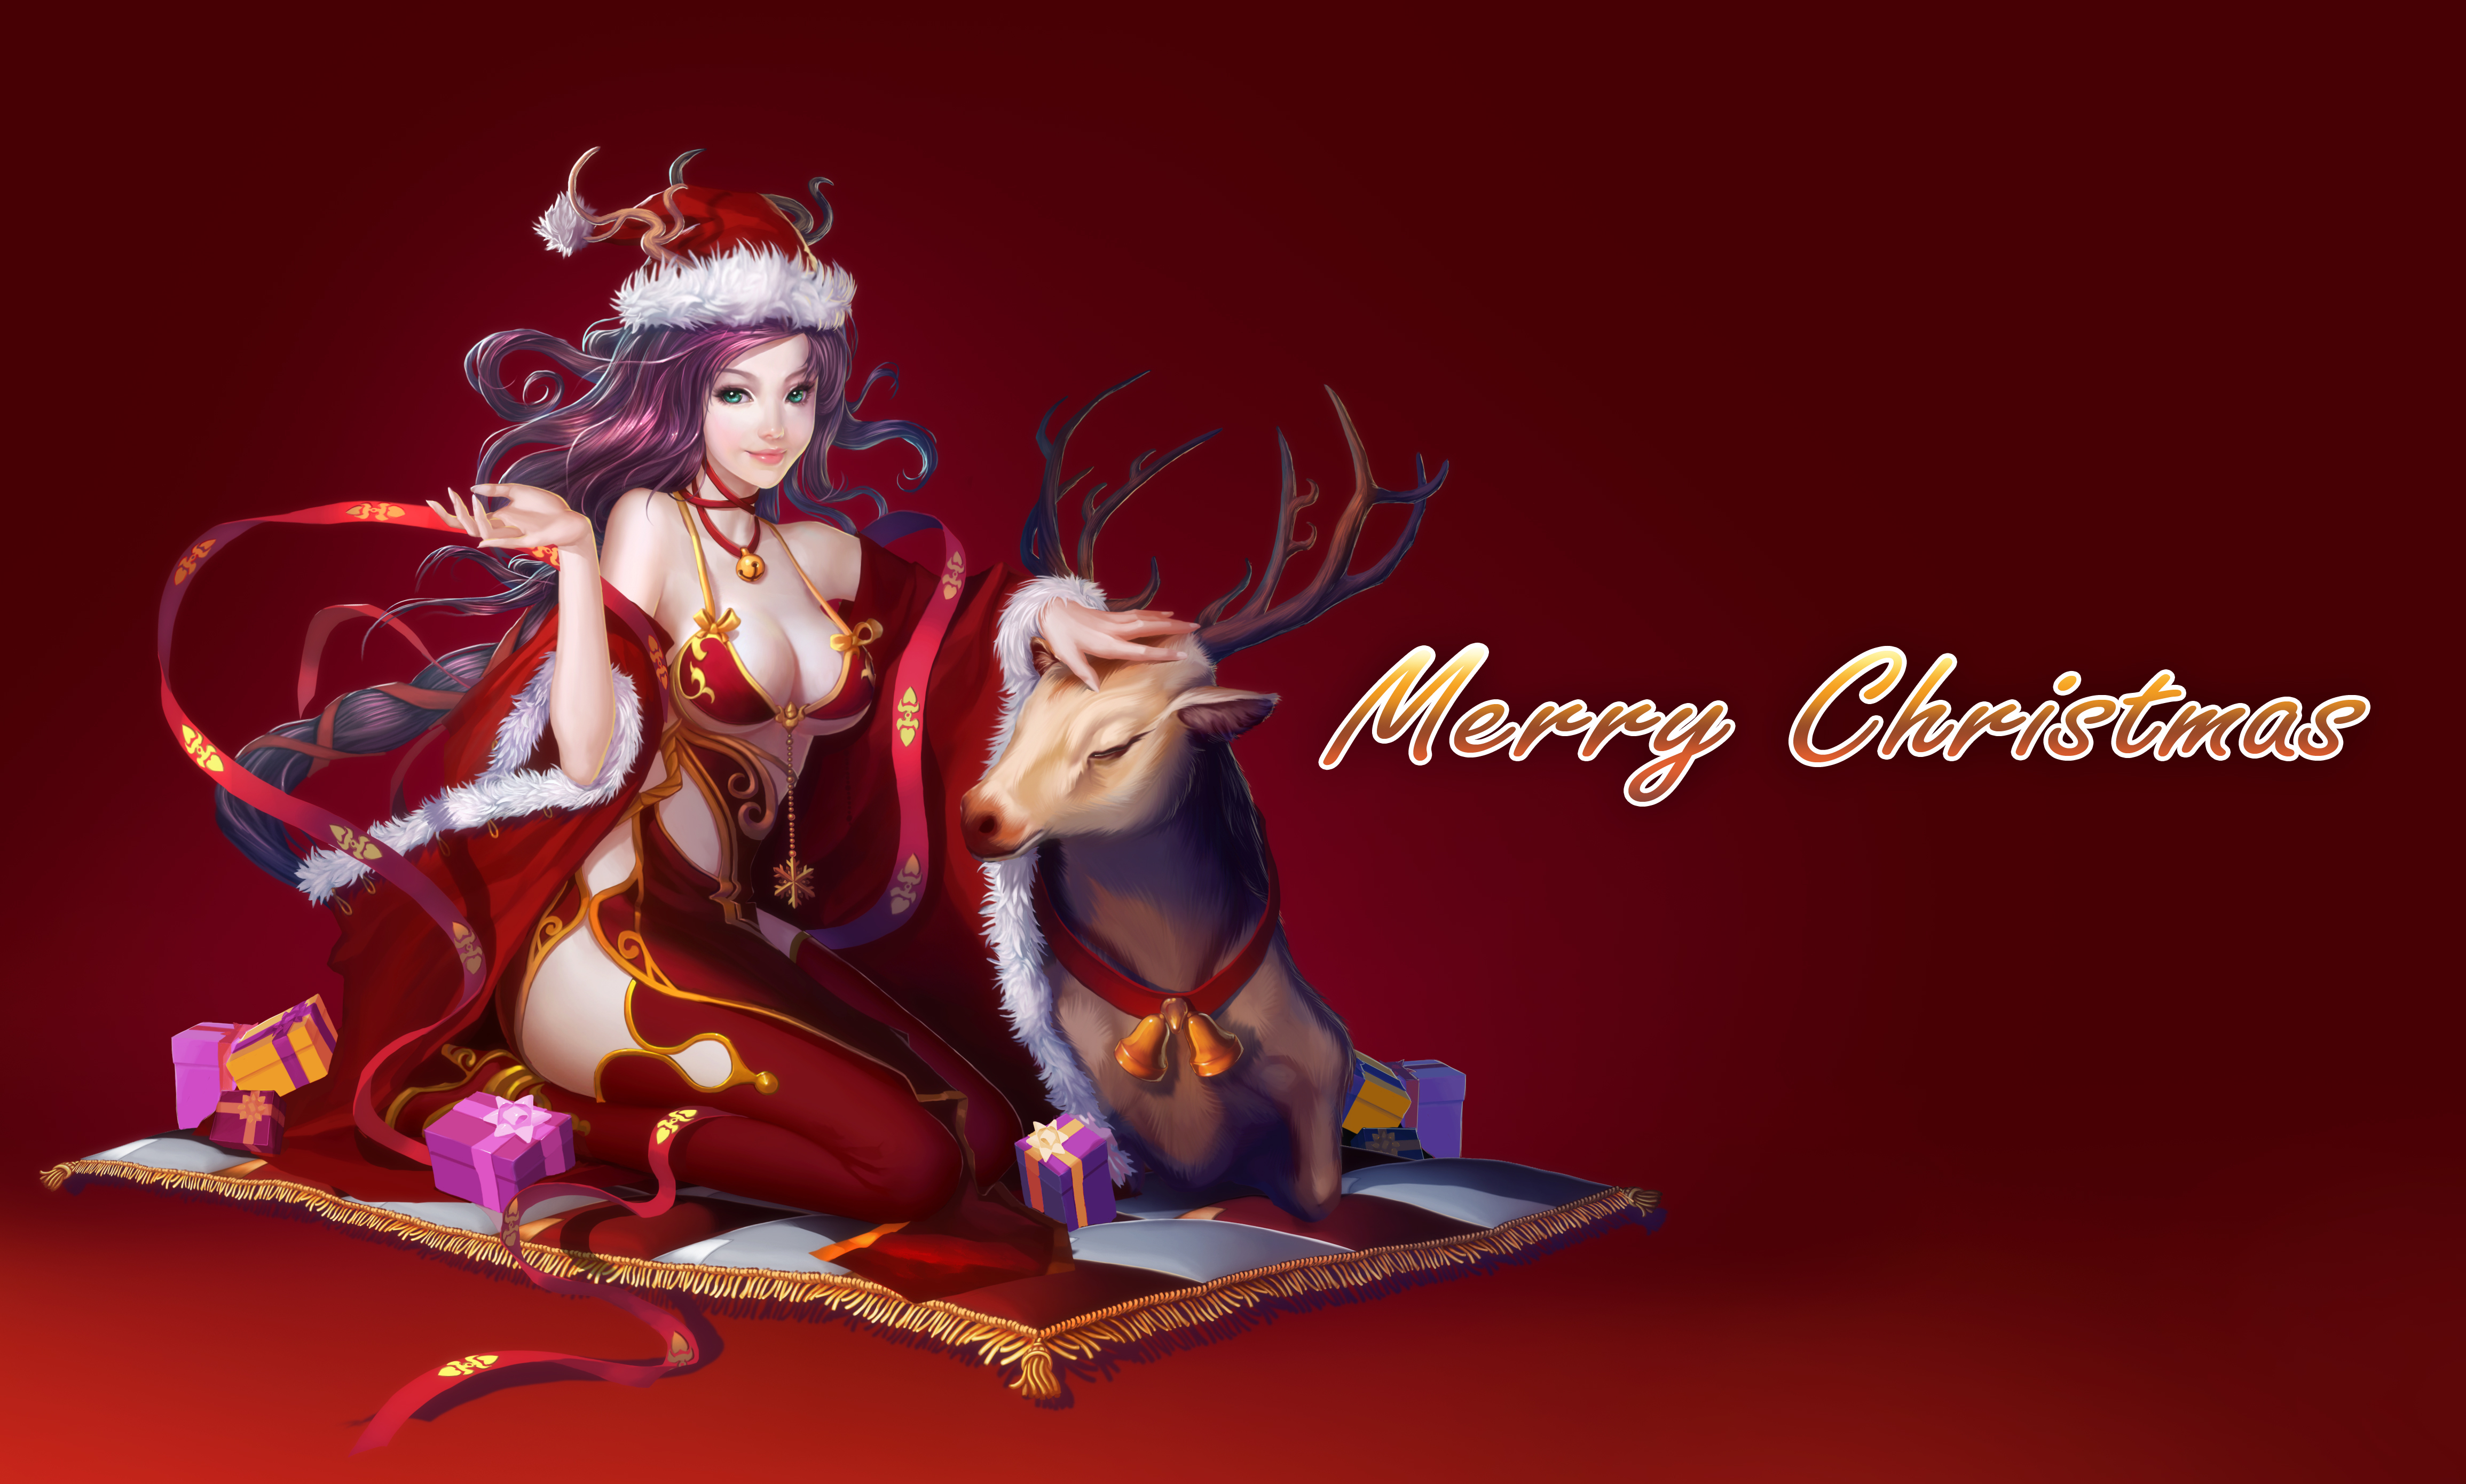 Wallpapers new year christmas holiday on the desktop